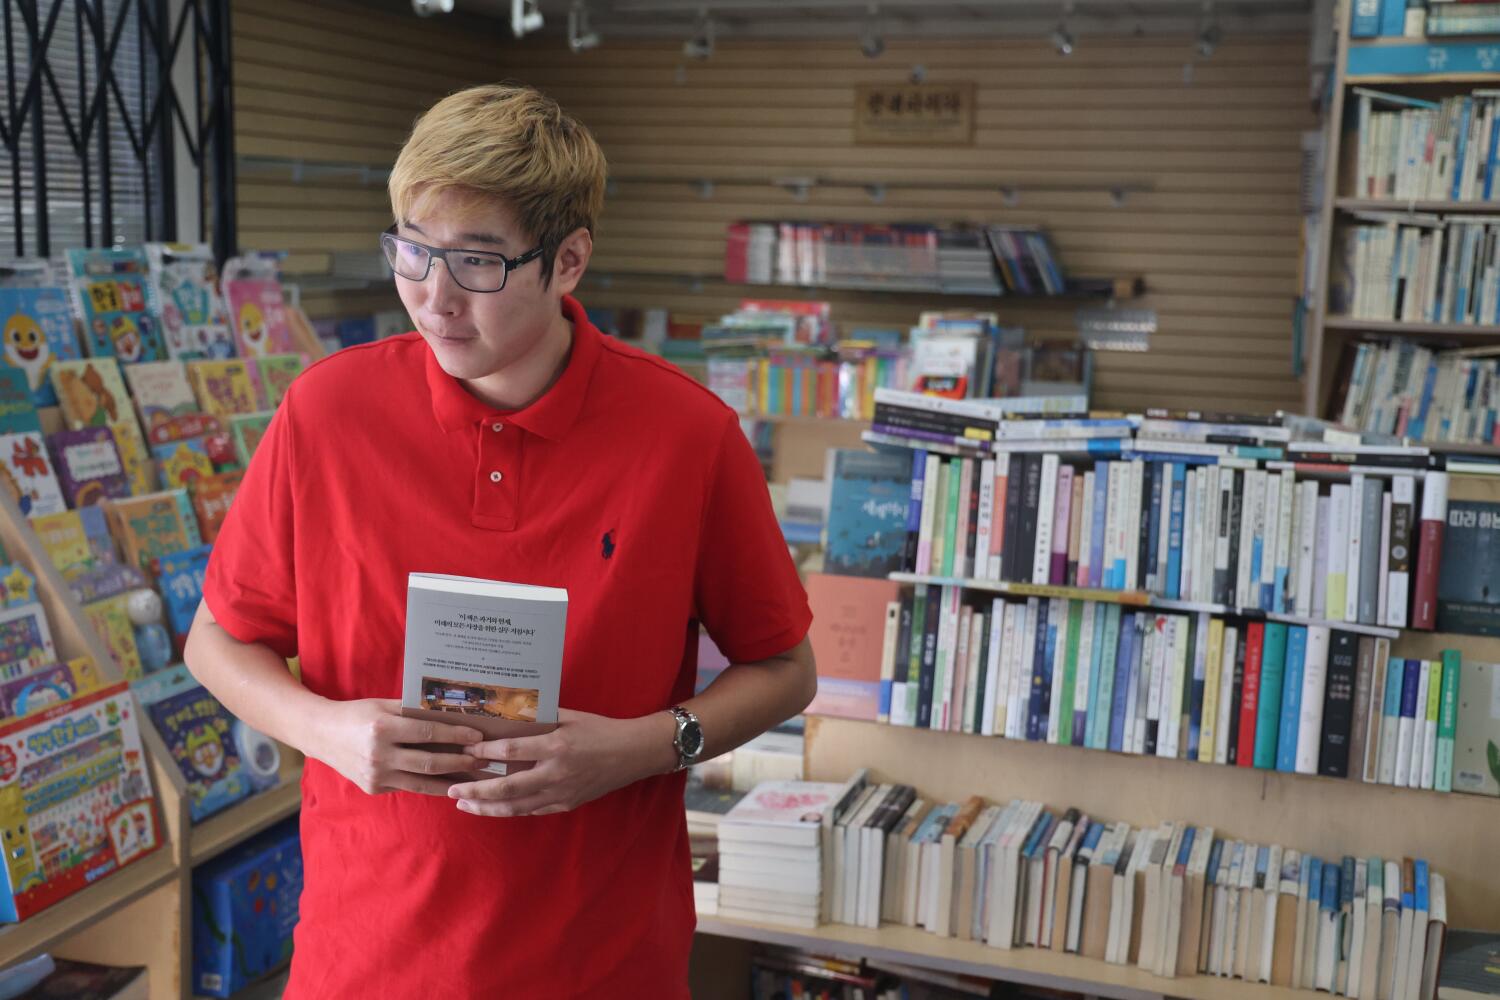 Korean bookstores in L.A. are dying. Here's how one survives